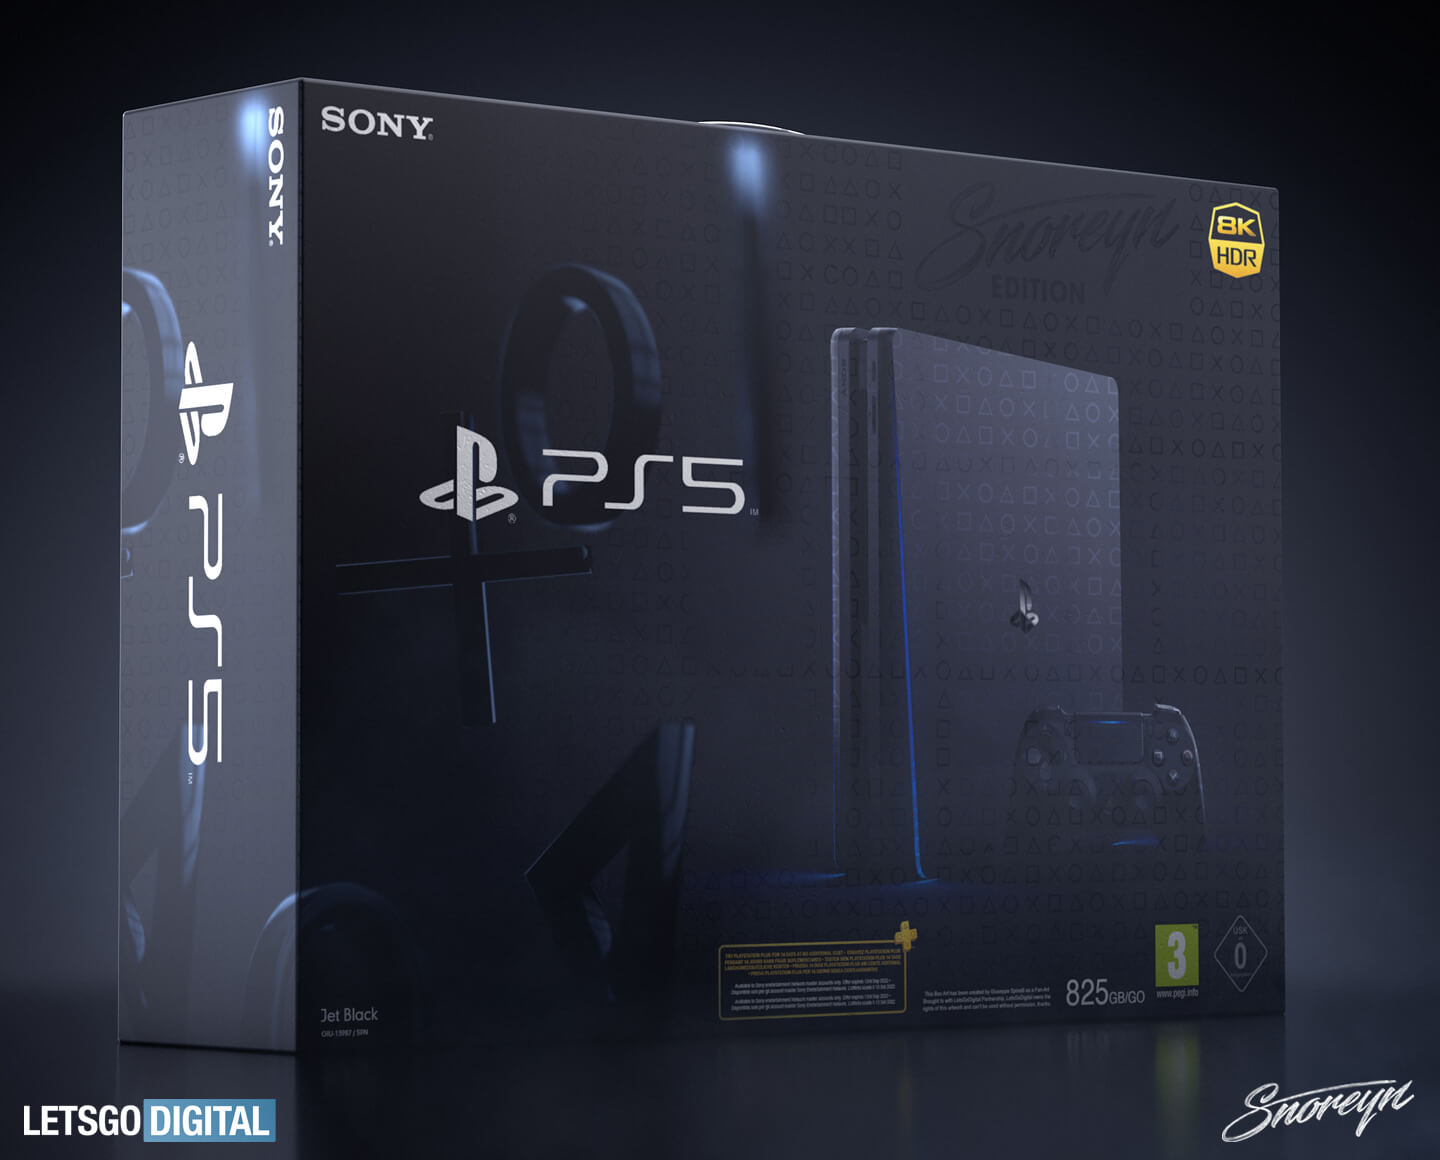 playstation 5 what's in the box